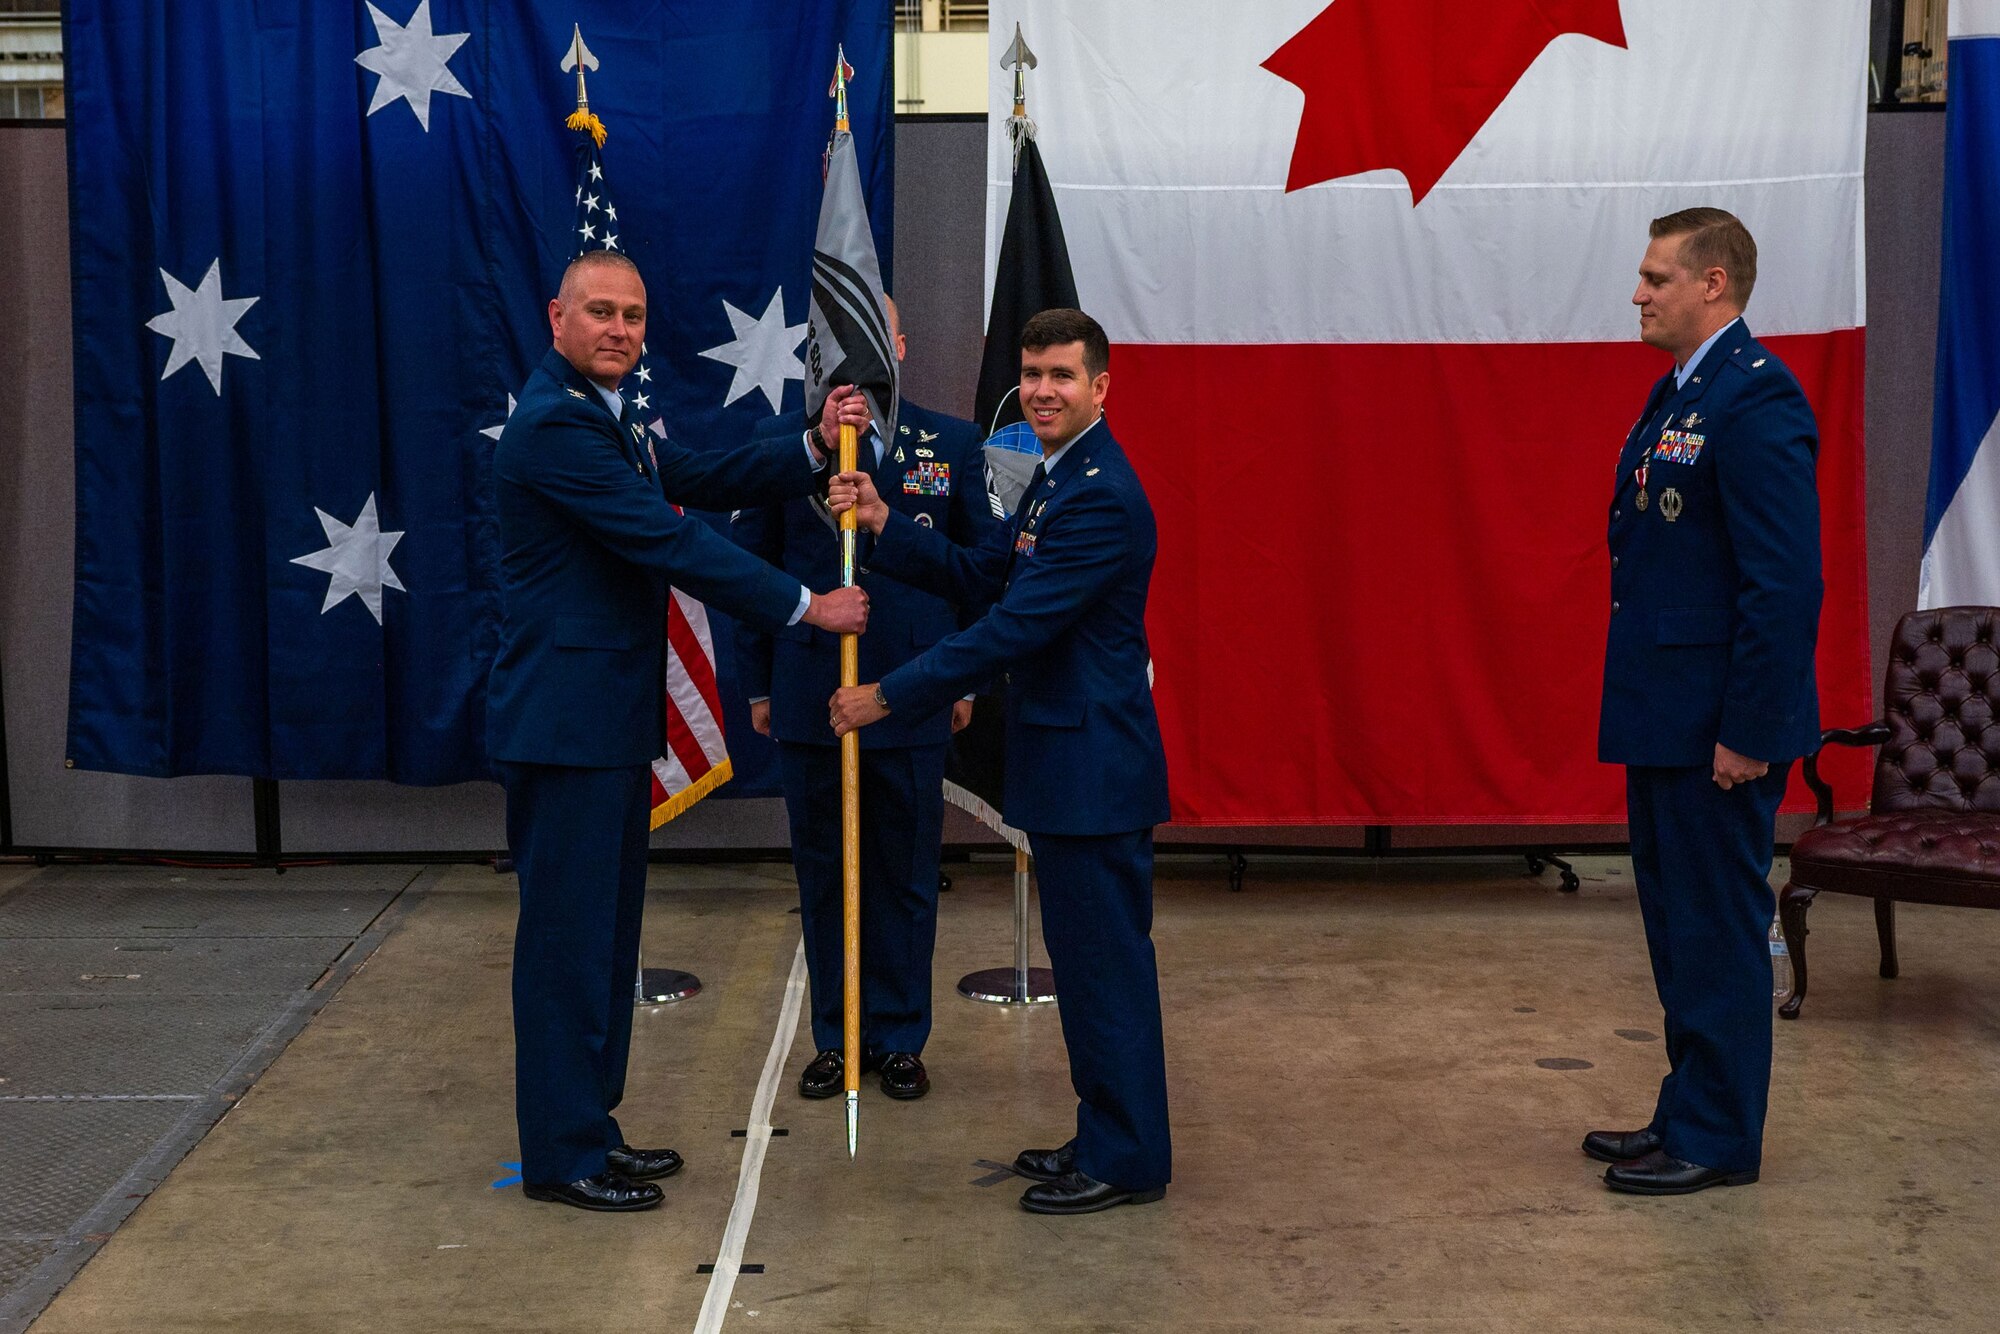 U.S. Space Force Col. Marc A. Brock, Space Delta 2 commander, left, holds the 18th Space Defense Squadron (18 SDS) guidon with incoming 18 SDS commander Lt. Col. Jordan O.E. Muggduring the 18 SDS change of command ceremony at Vandenberg Space Force Base, Calif., June 21, 2023. The ceremonial exchanging of the guidon signifies U.S. Space Force Lt. Col. Matthew J. Lintker, outgoing 18 SDS commander, relinquishing his command of the 18 SDS over to Brock who then transferred the responsibility to Mugg. (U.S. Space Force photo by Tech. Sgt. Luke Kitterman)